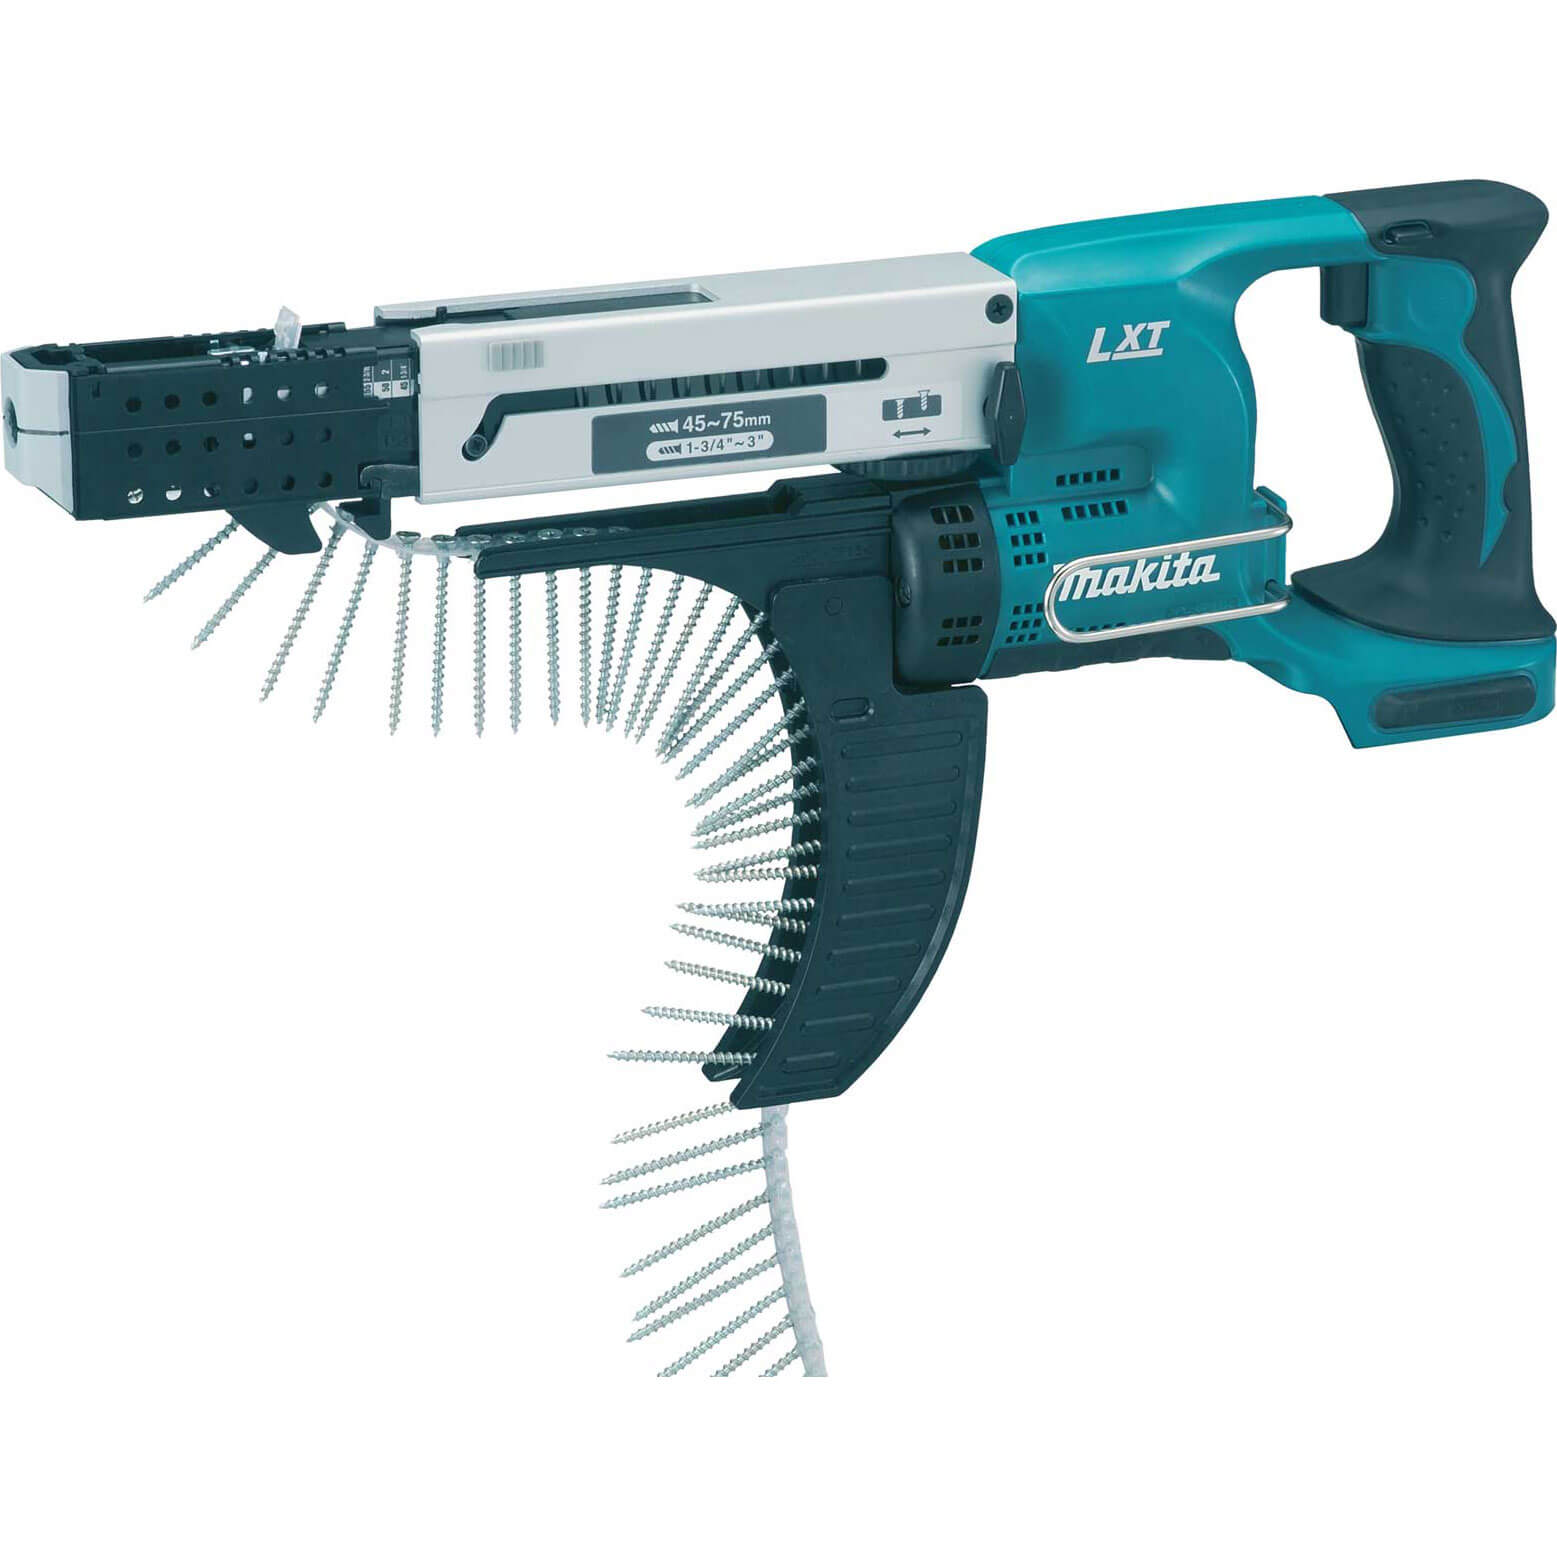 Photo of Makita Dfr750 18v Cordless Lxt Auto Feed Screwdriver No Batteries No Charger No Case